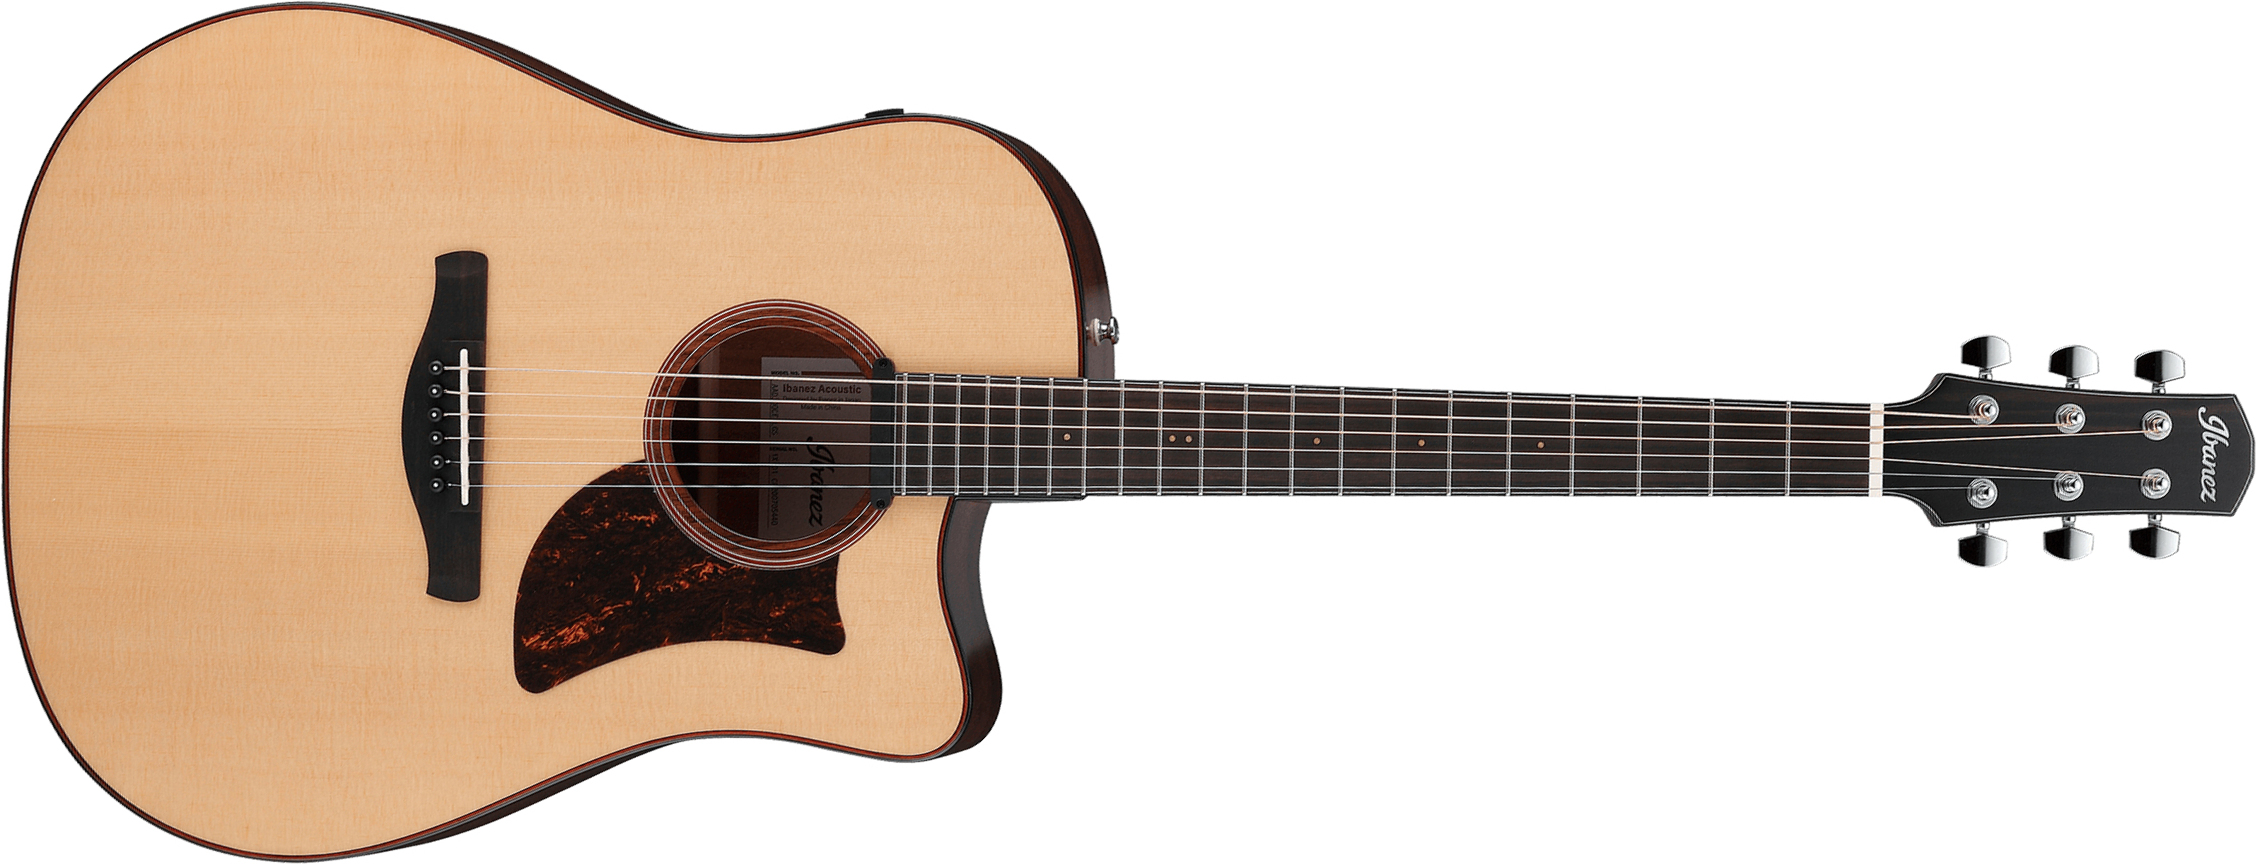 Ibanez Aad300ce Lgs Advanced Dreadnought Cw Epicea Okoume Eb - Natural Low Gloss - Electro acoustic guitar - Main picture